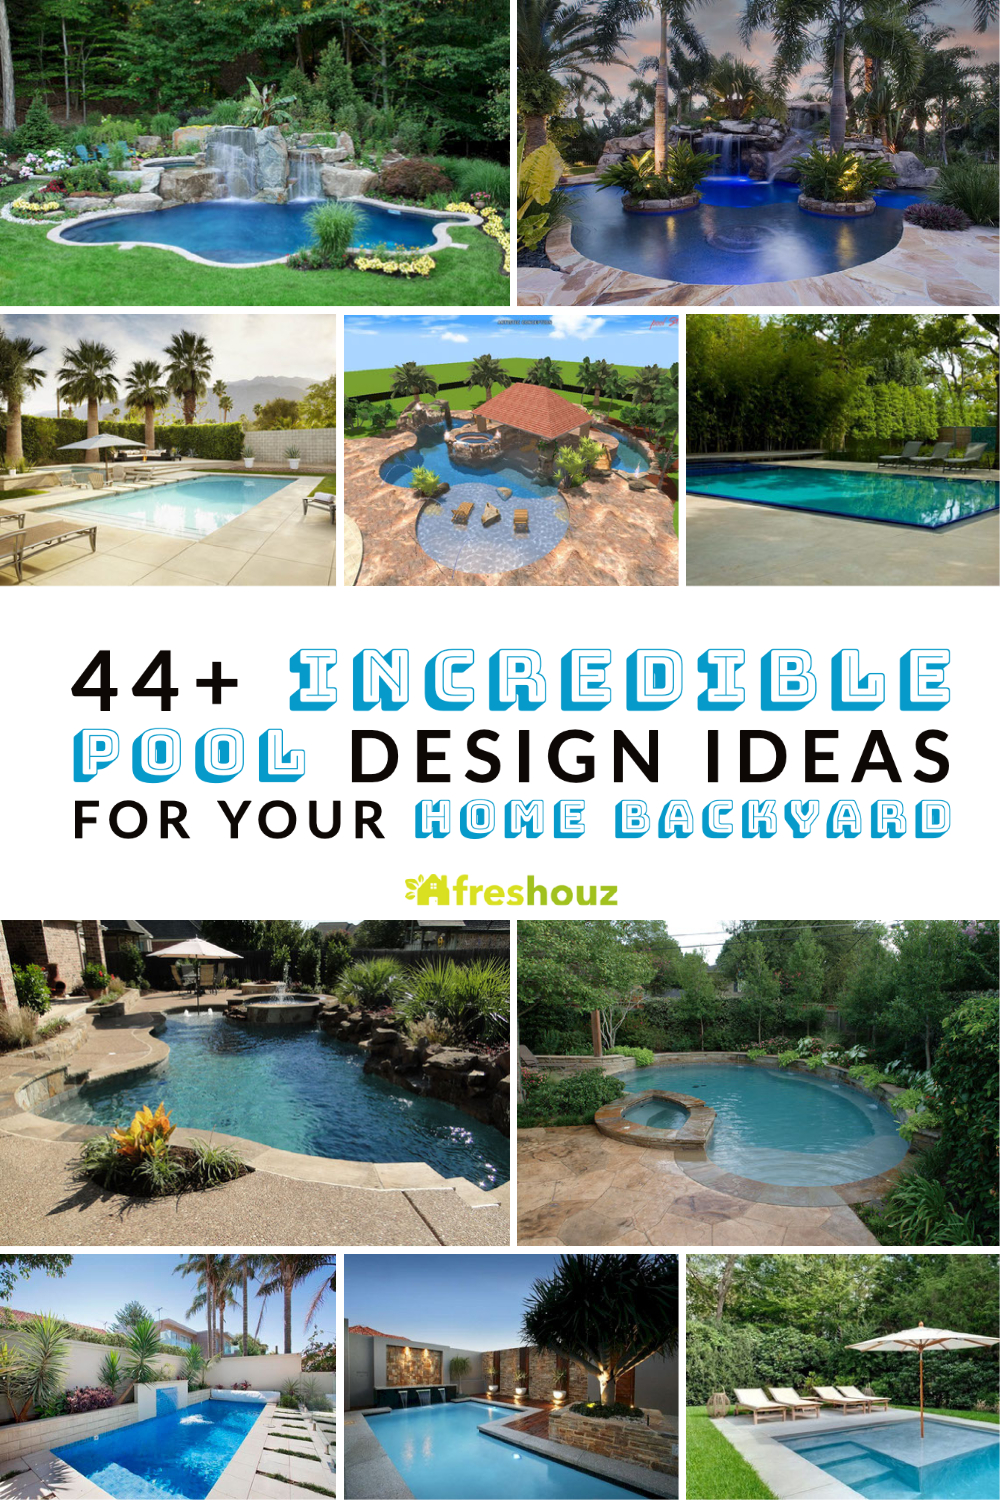 Incredible Pool Design Ideas For Your Home Backyard